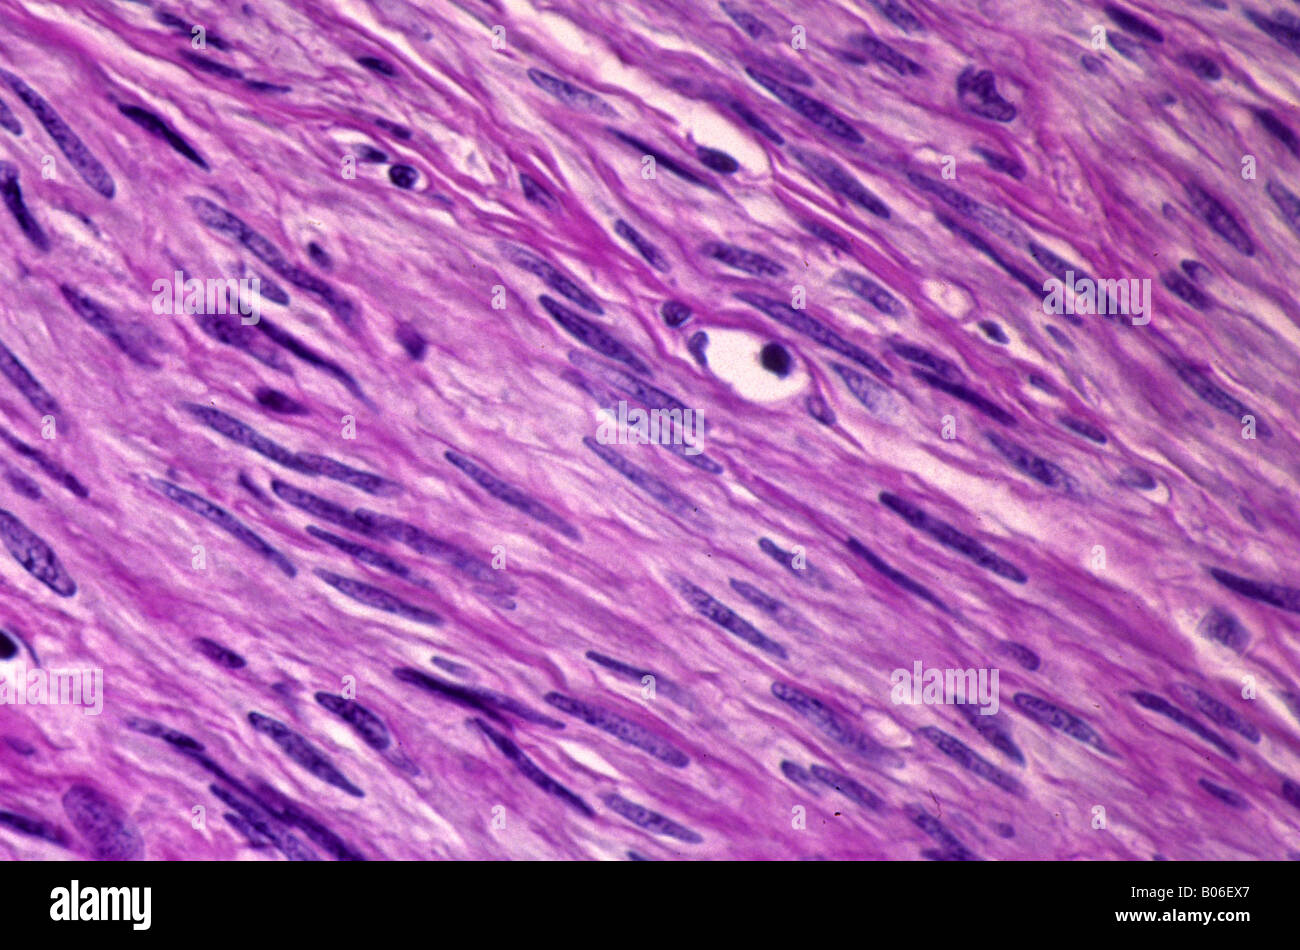 Smooth muscle fibres Stock Photo